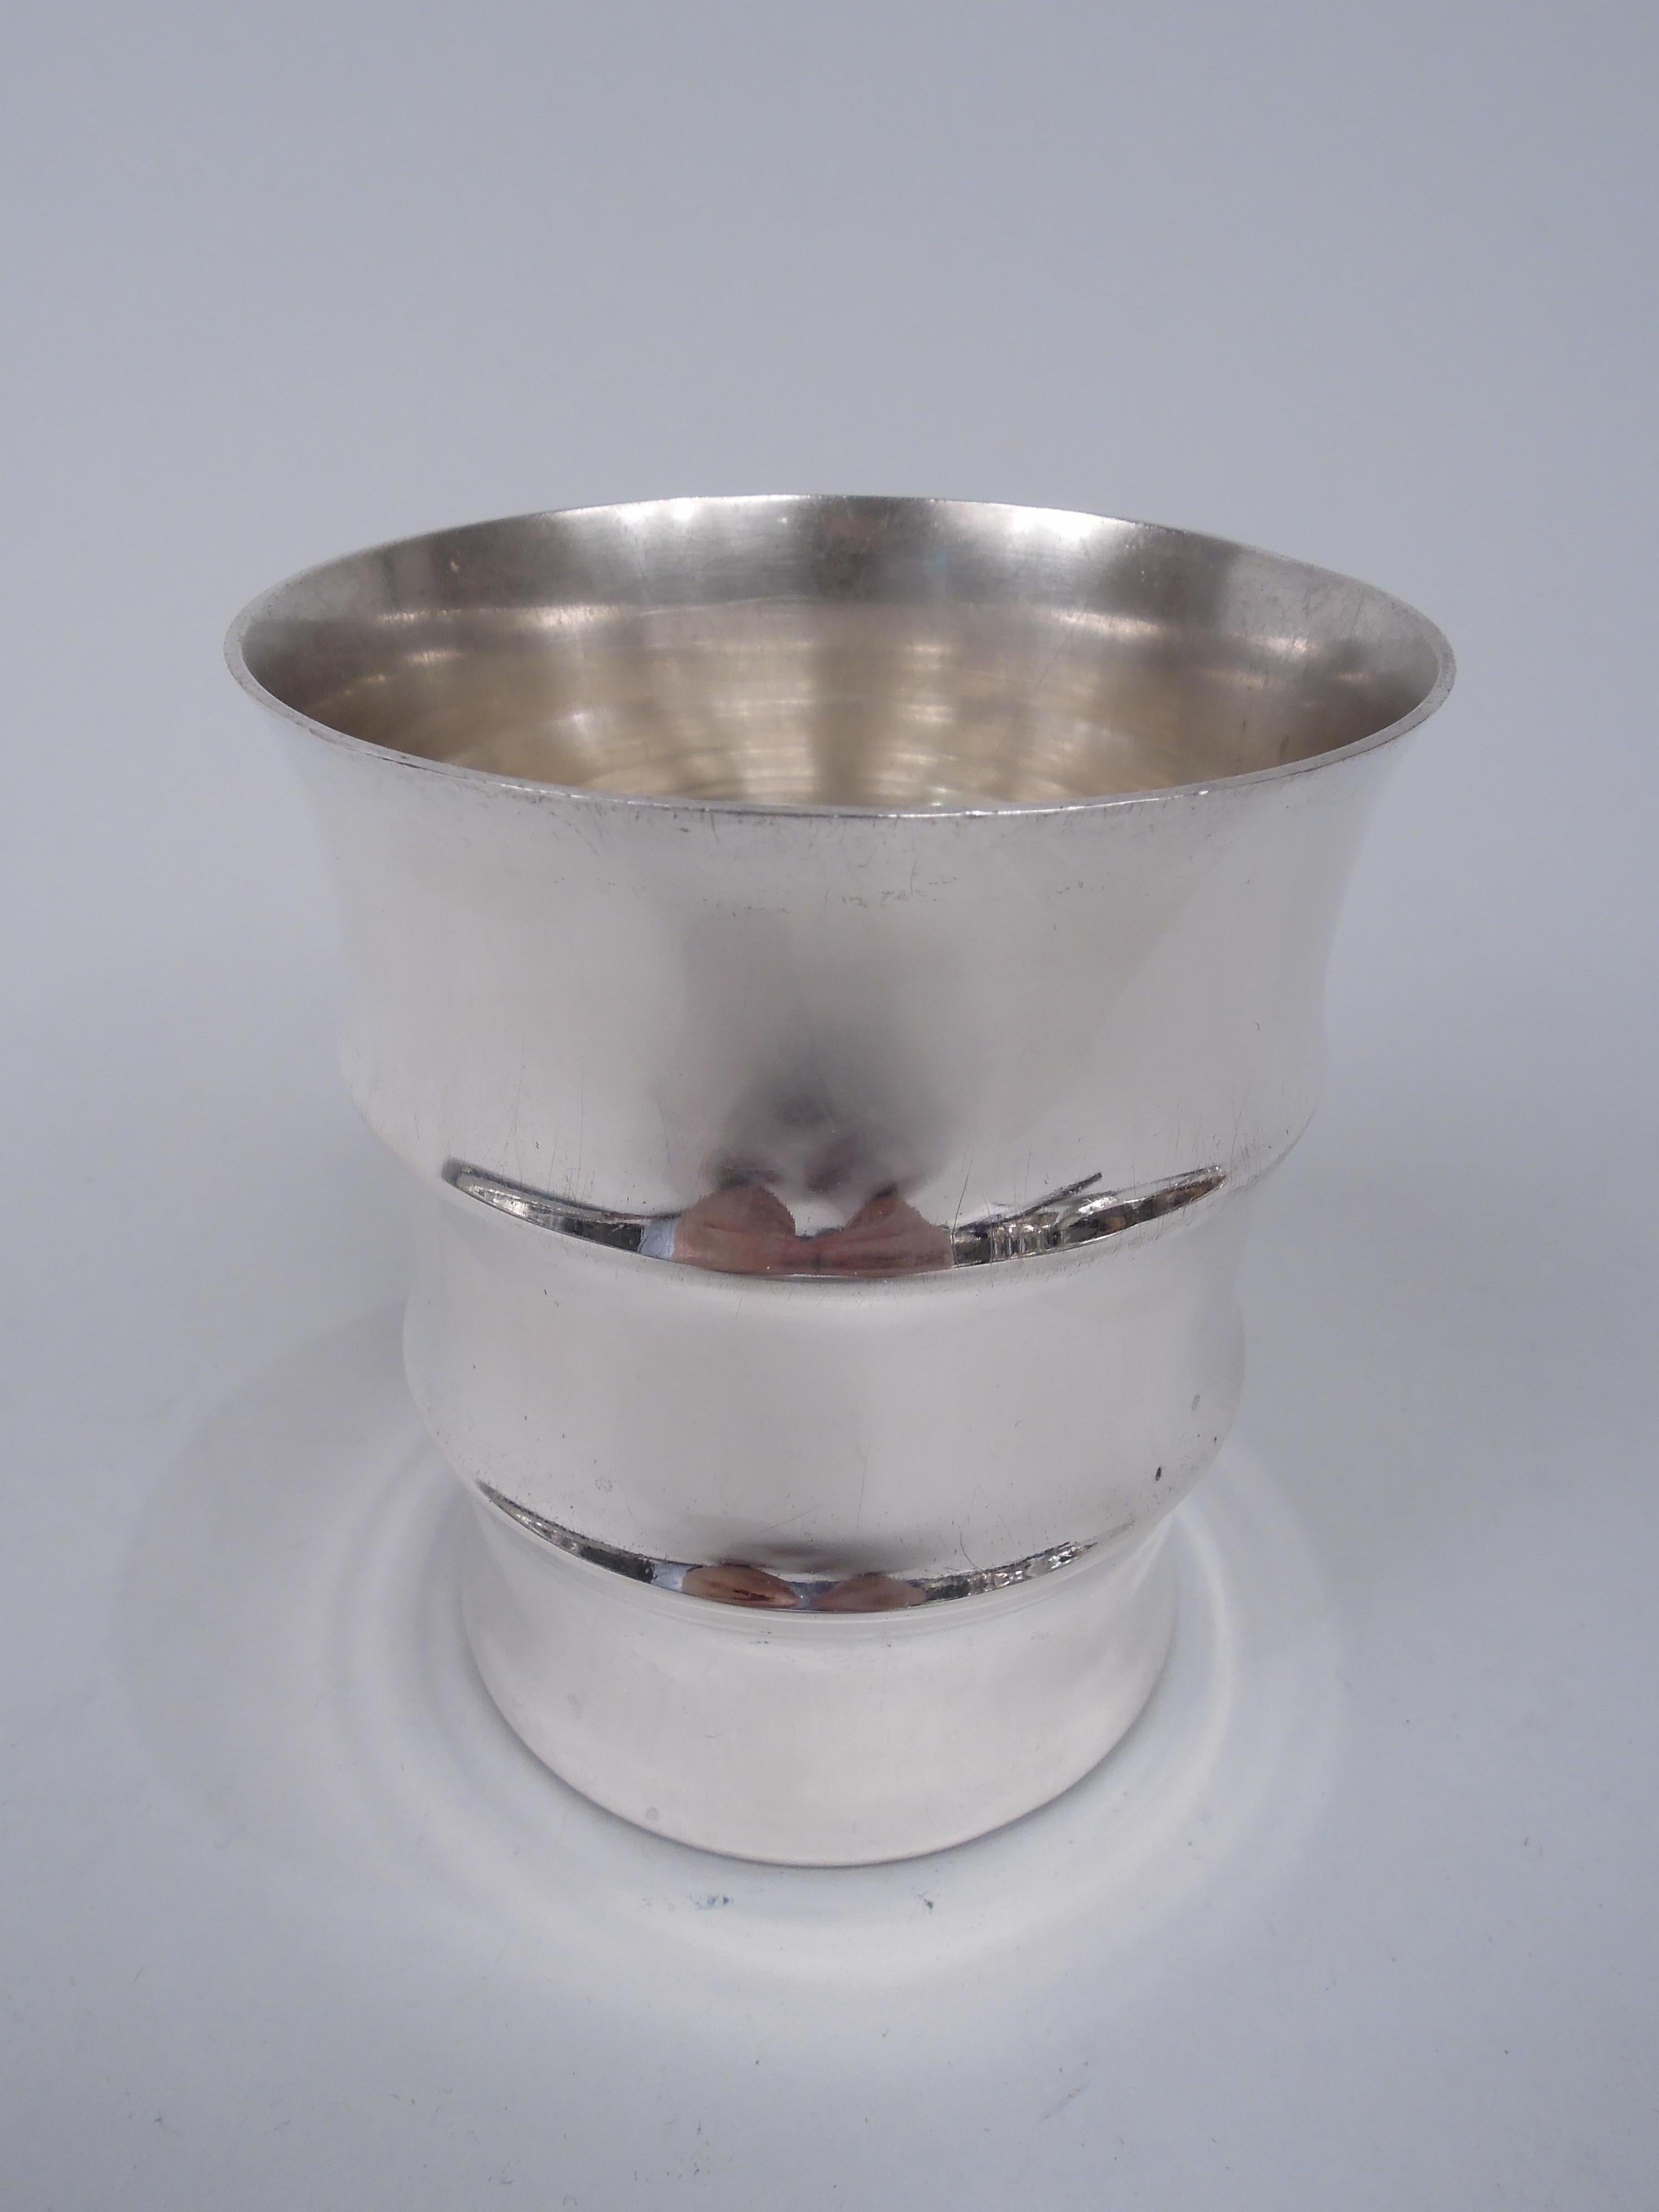 American Modern sterling silver tumbler. Sides comprise three concave rings with flared mouth rim. Marked “Tiffany & Co / Sterling / 549”. Weight: 4.6 troy ounces.